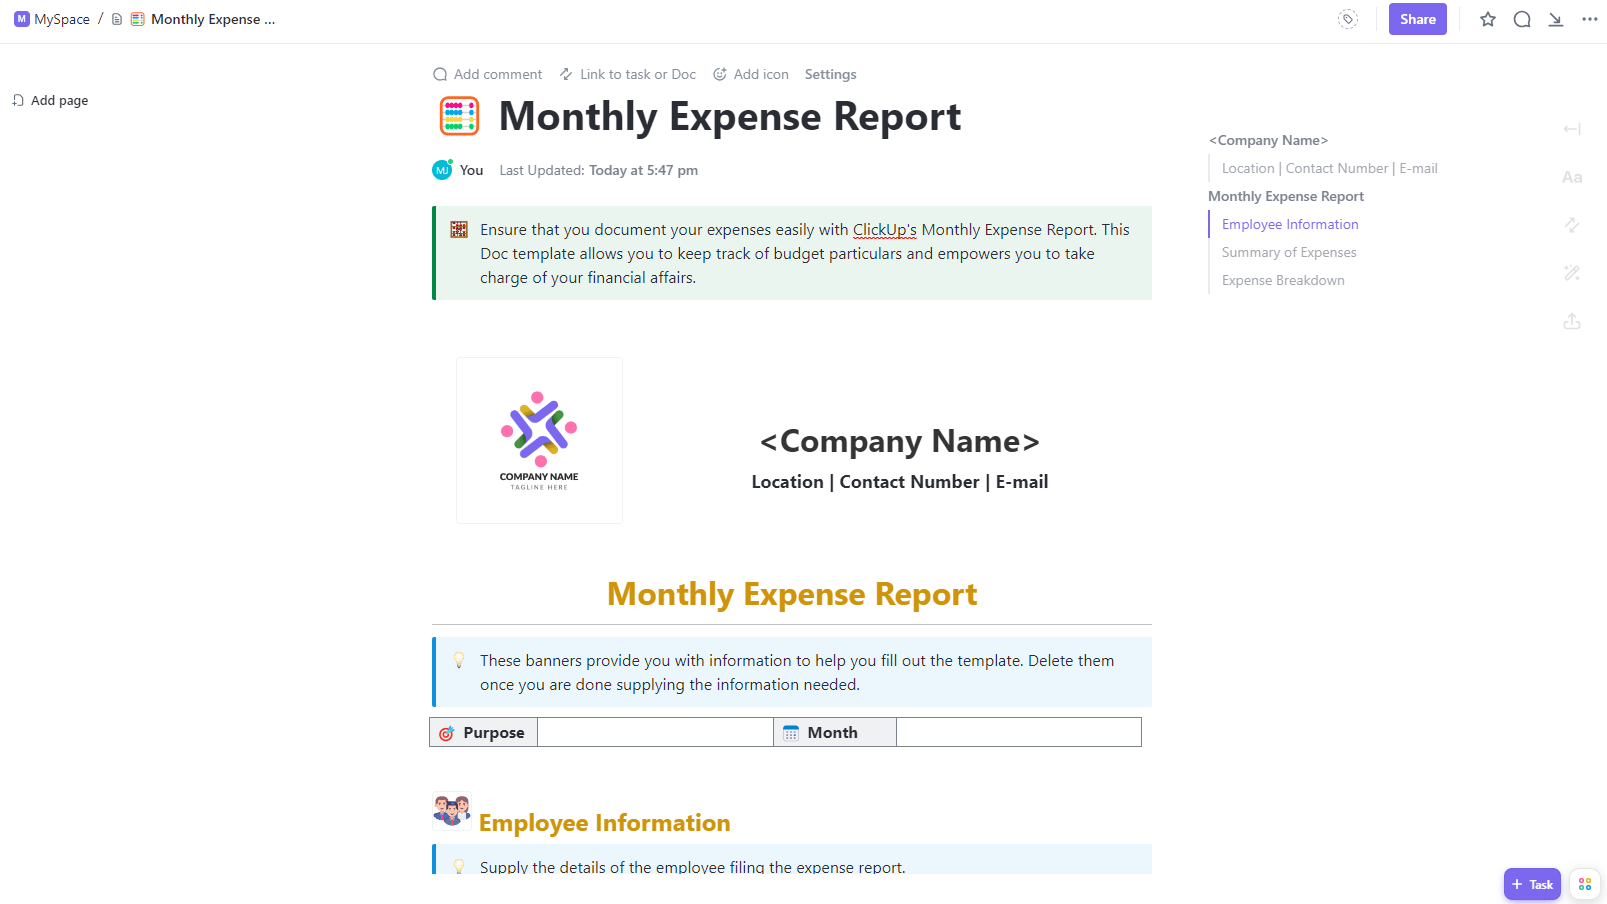 Monthly Expense Report Template by ClickUp